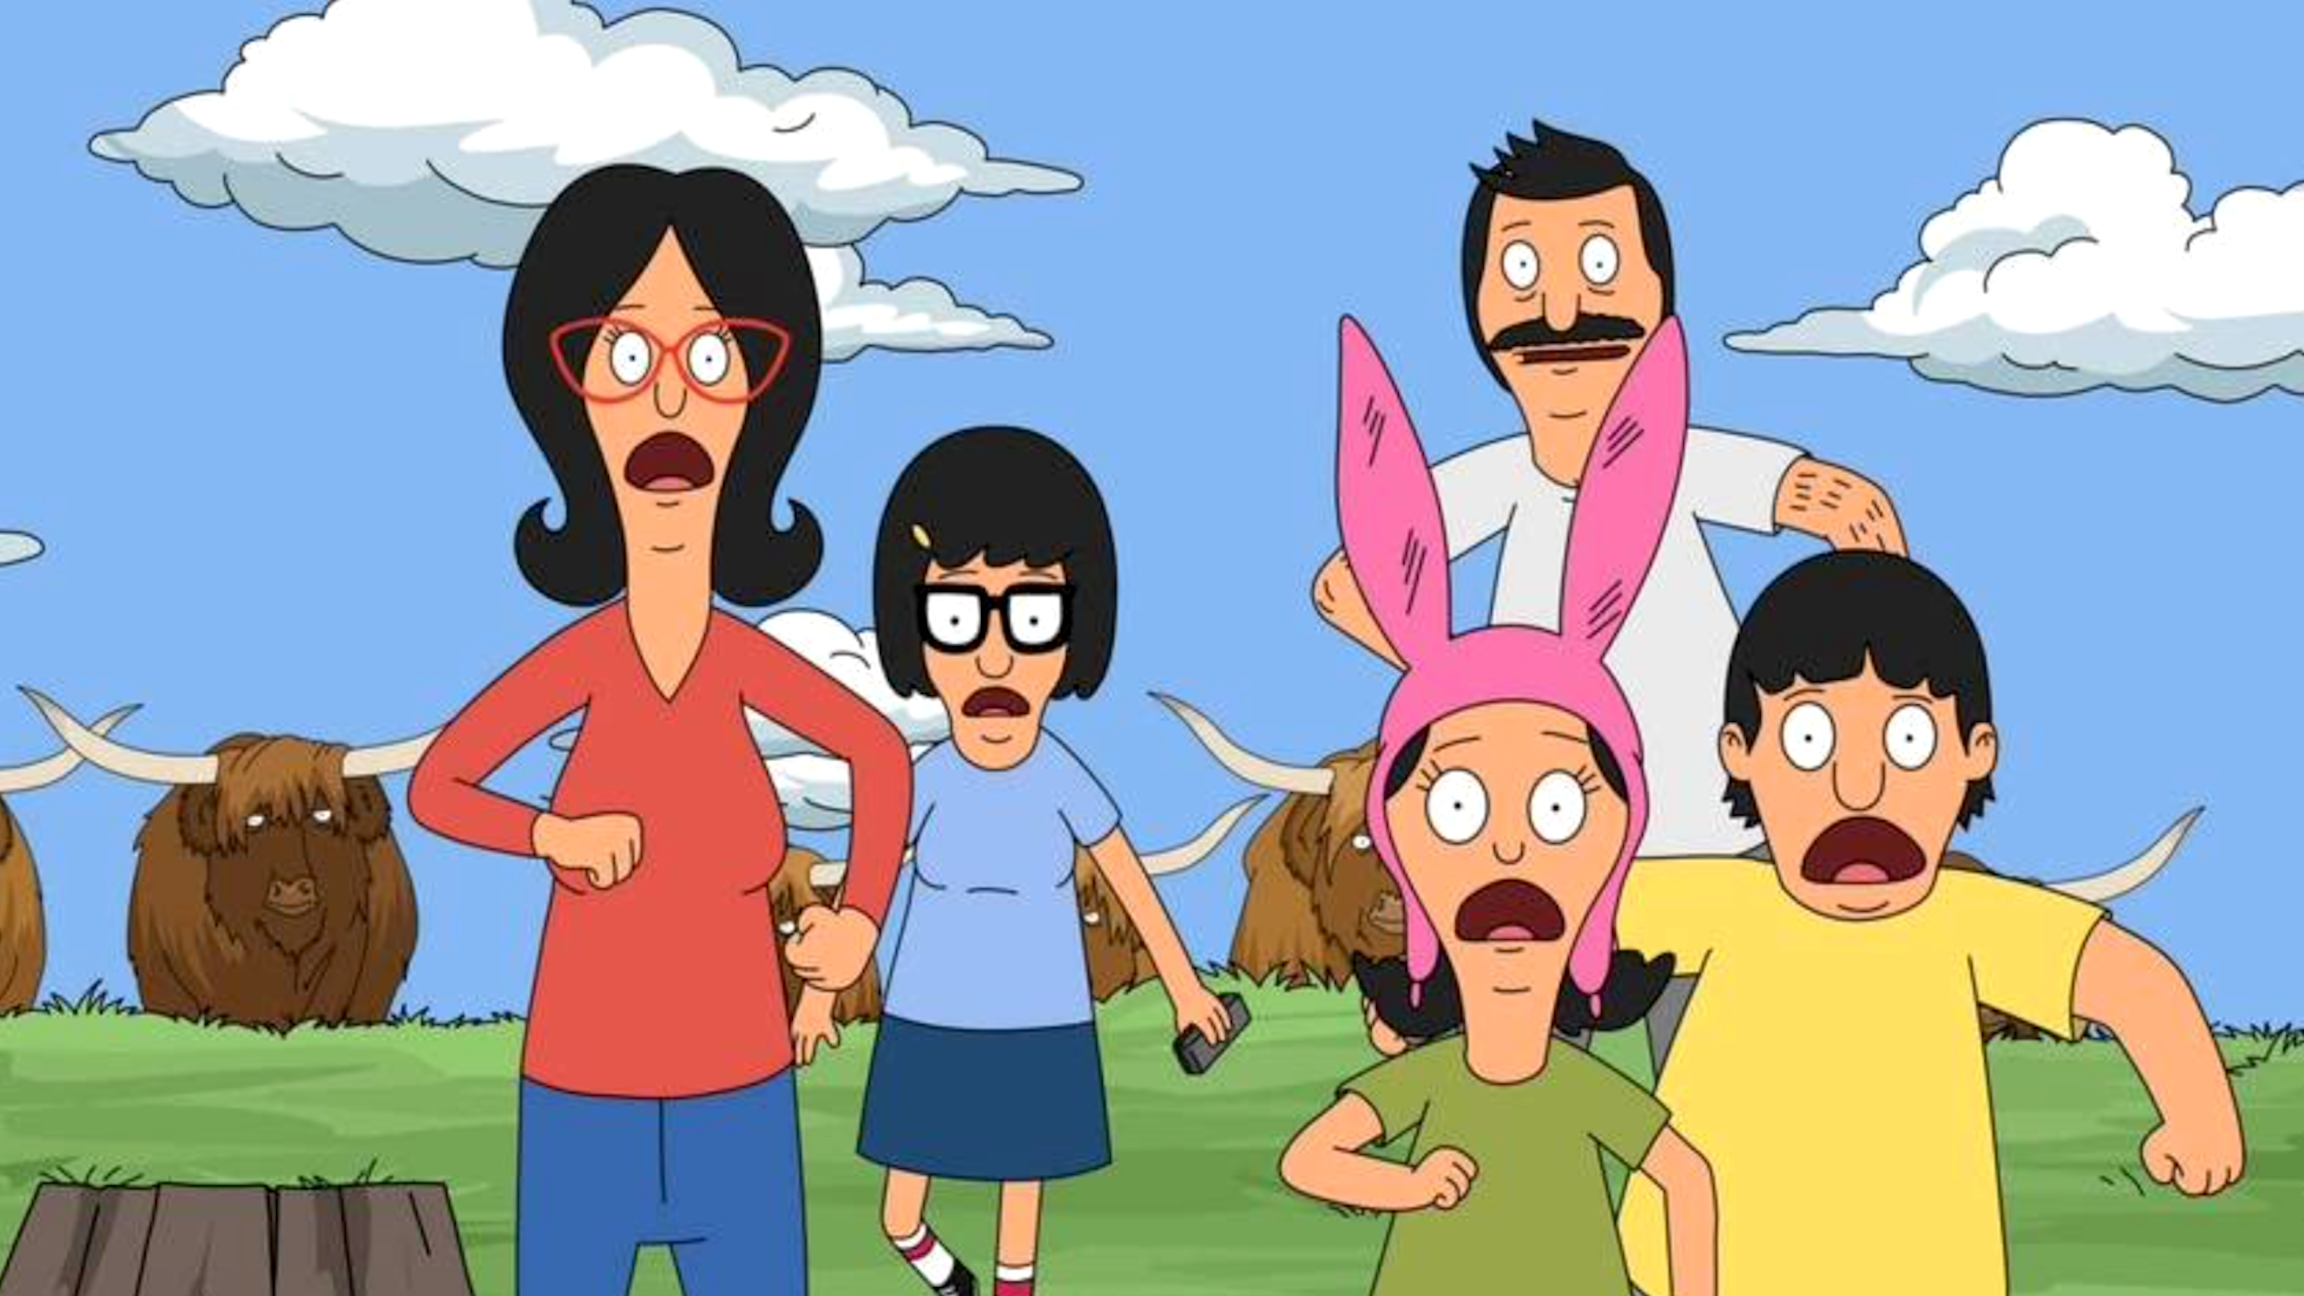 Where Does 'Bob's Burgers' Take Place? – We Got This Covered